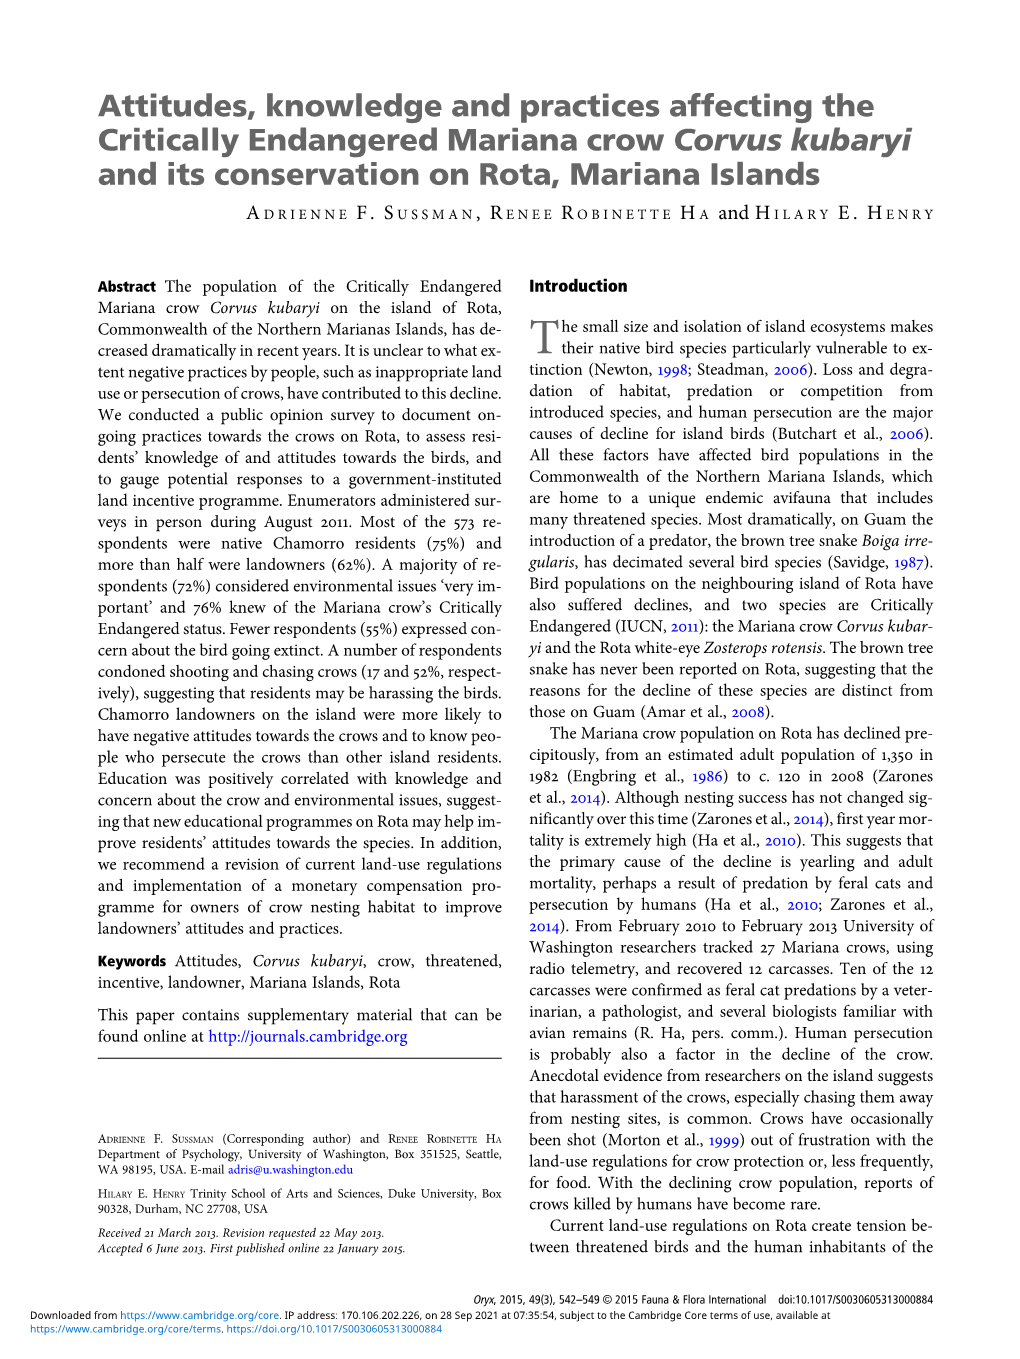 Attitudes, Knowledge and Practices Affecting the Critically Endangered Mariana Crow Corvus Kubaryi and Its Conservation on Rota, Mariana Islands